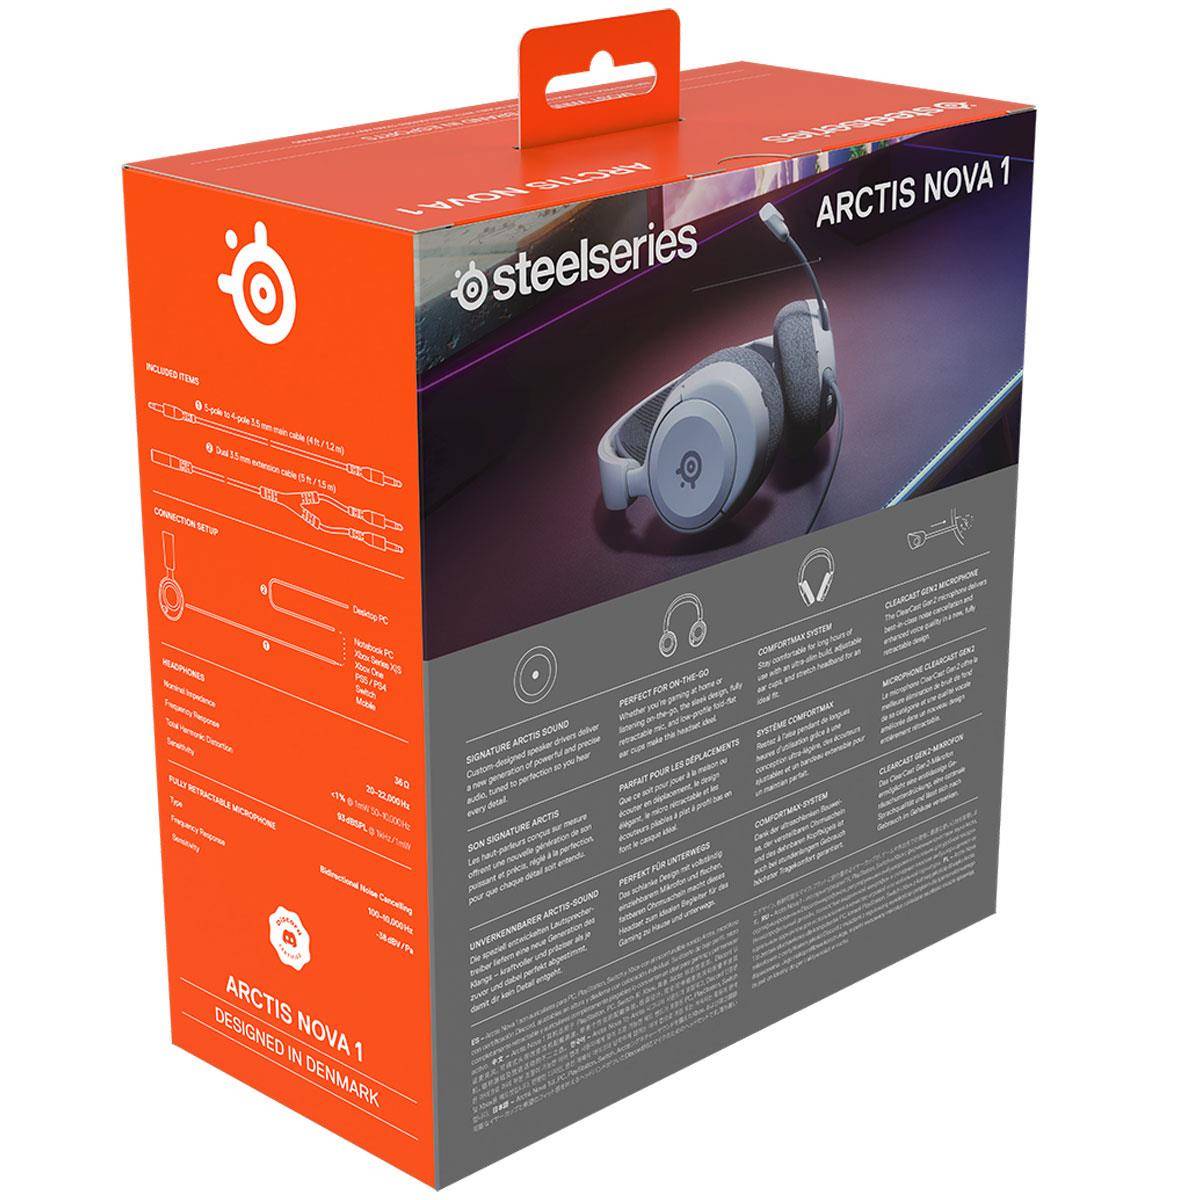 SteelSeries Arctis Nova 1 Wired Gaming Headset for PC, PS4